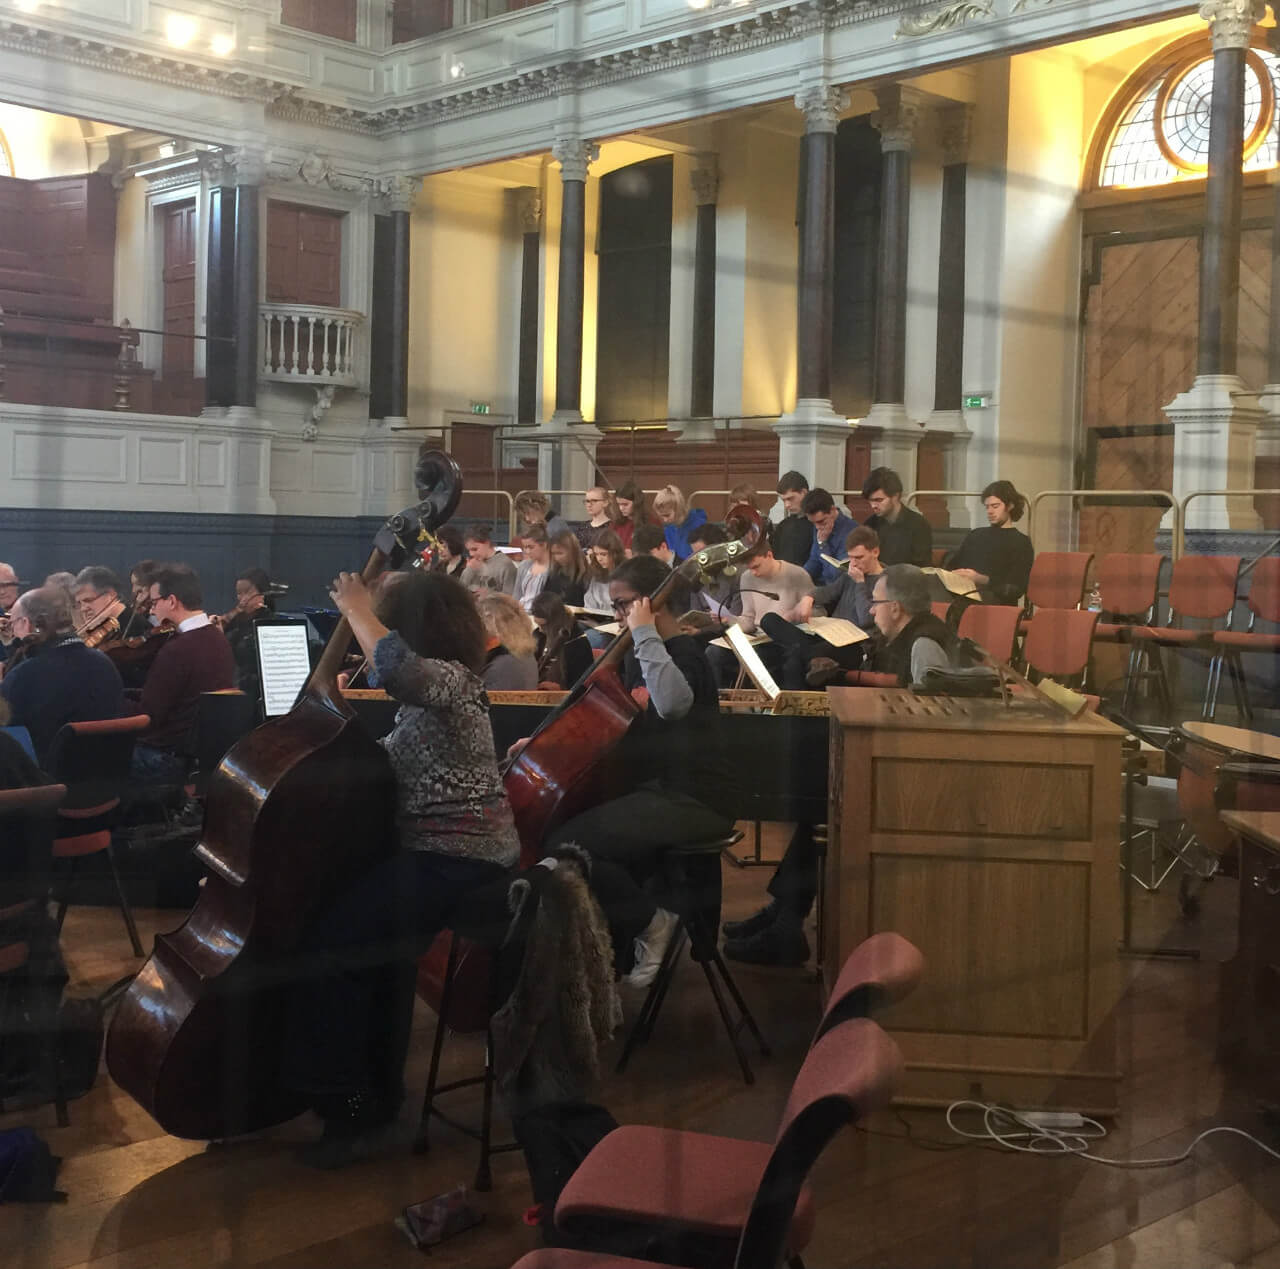 Orchestra Rehearsal with Chamber Organ